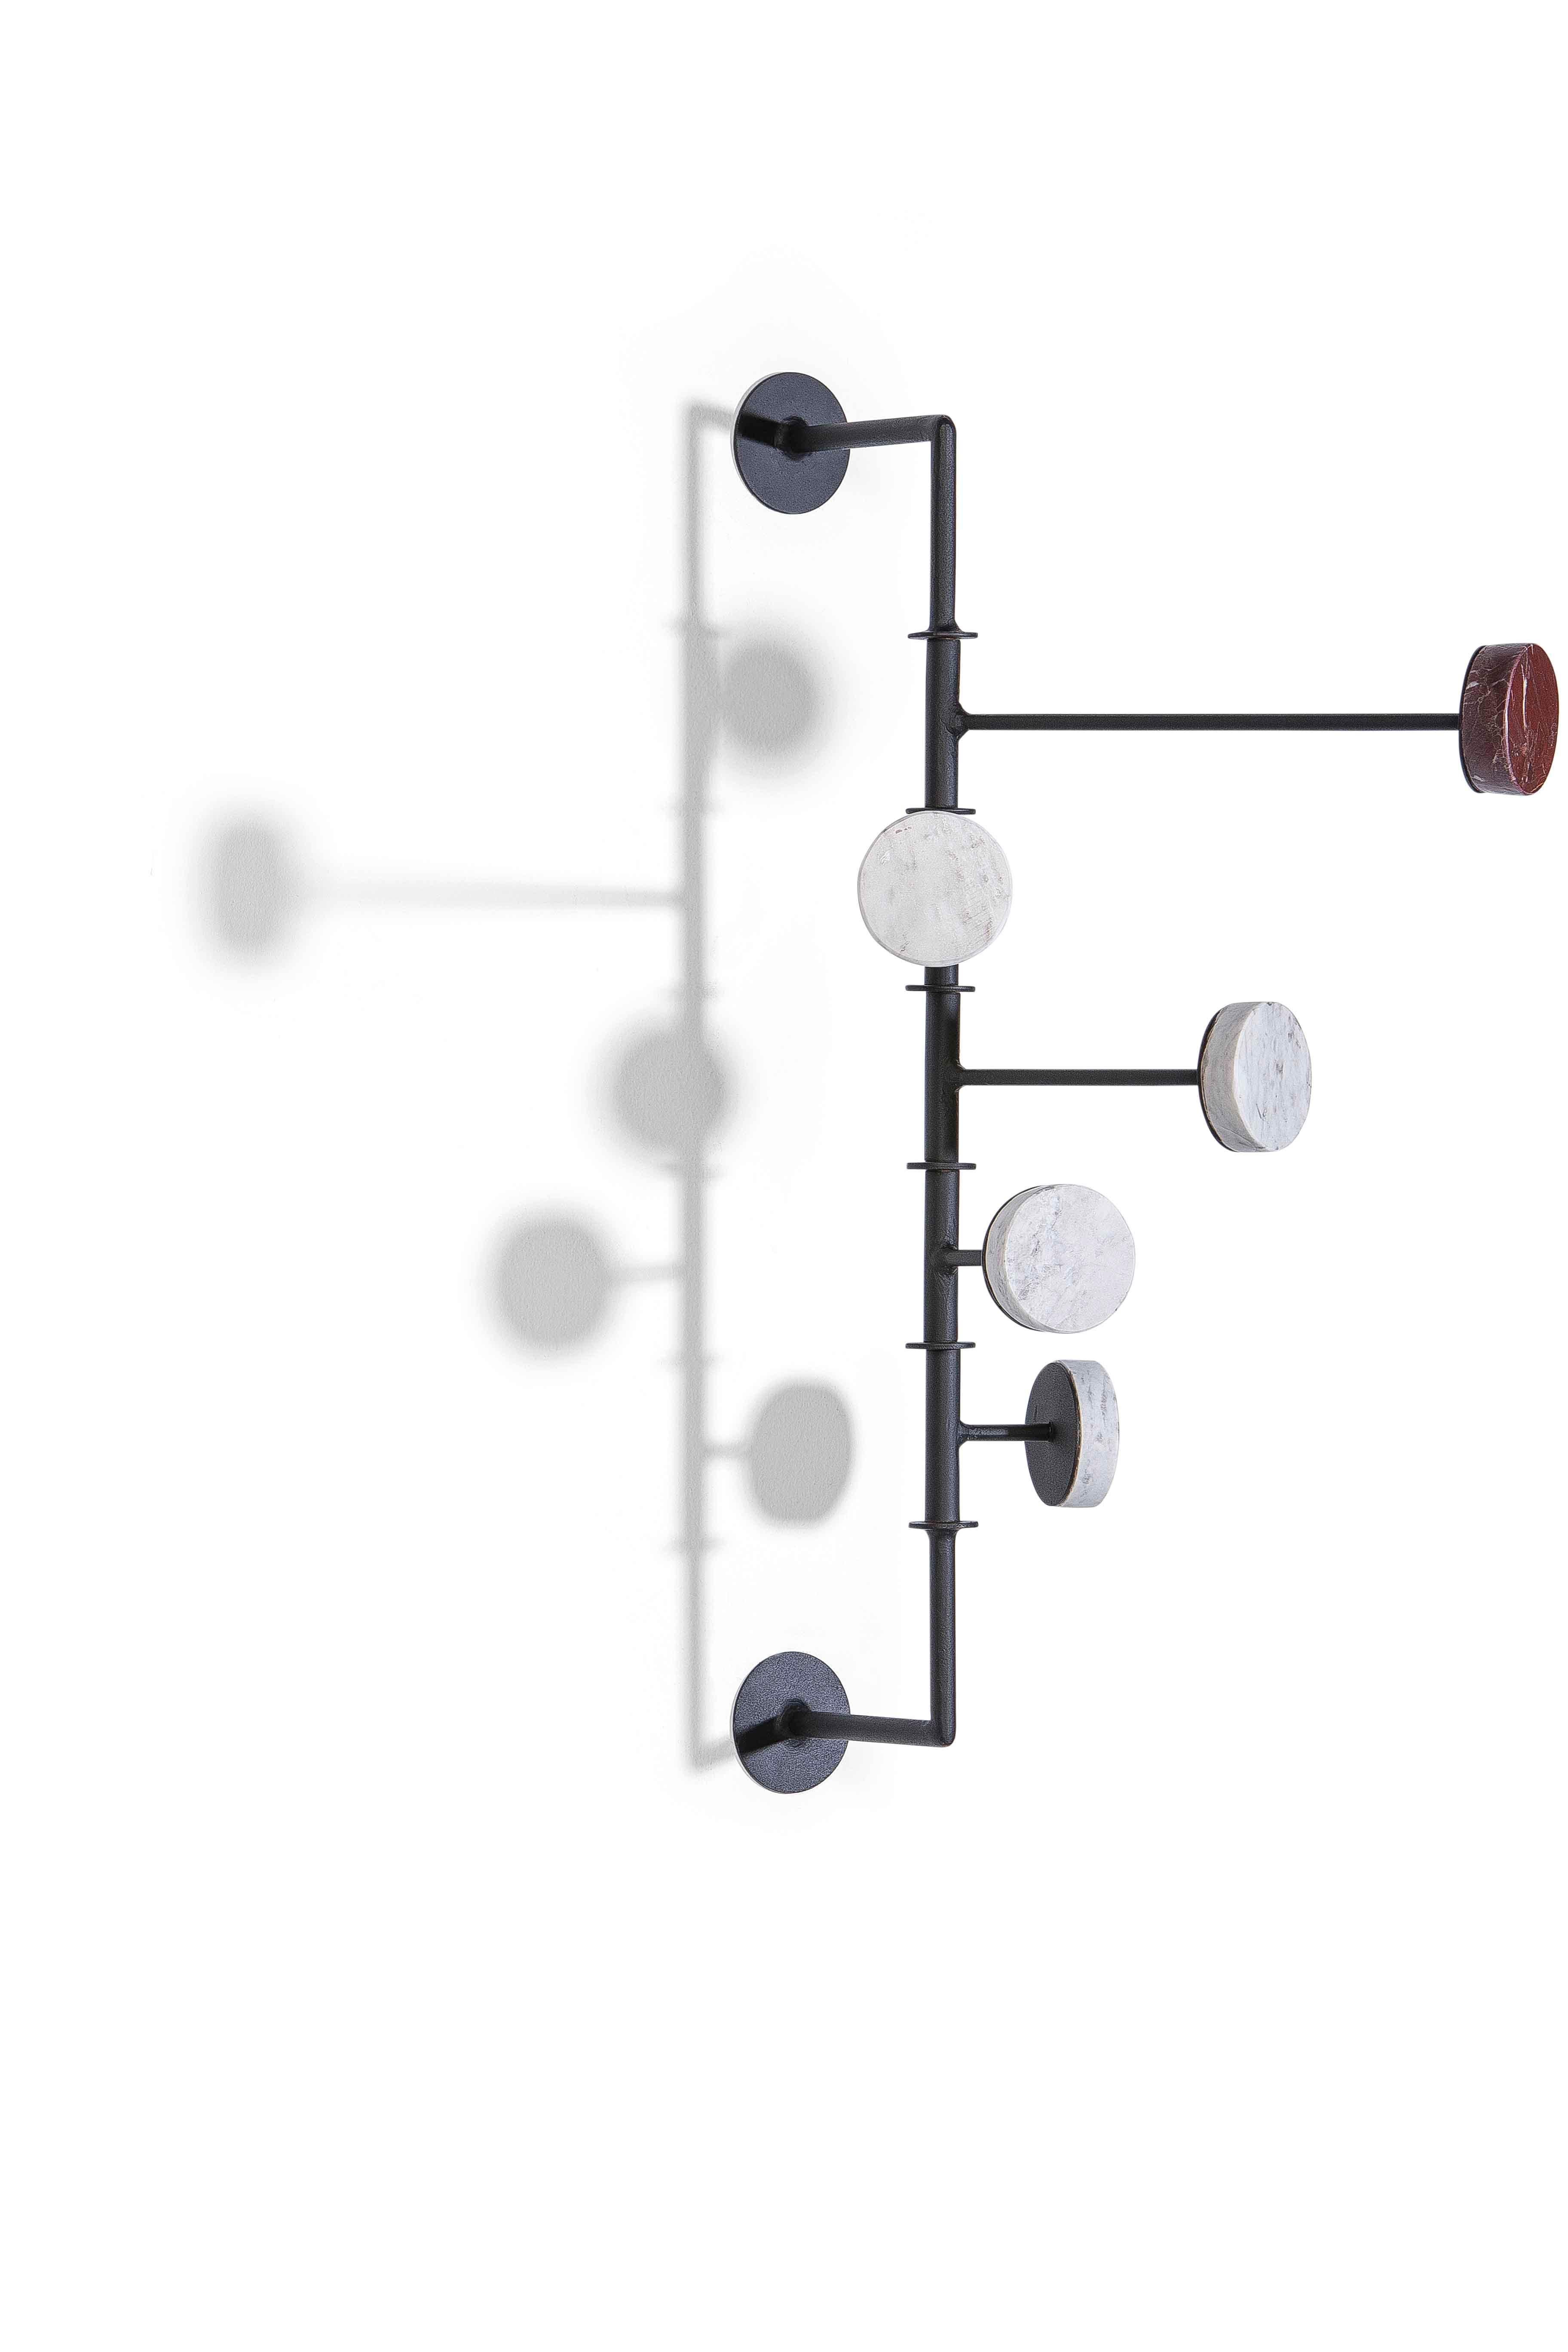 Polished Contempory Wall Coat Rack Made with Brazilian Marble and Steel by Tiago Curioni For Sale